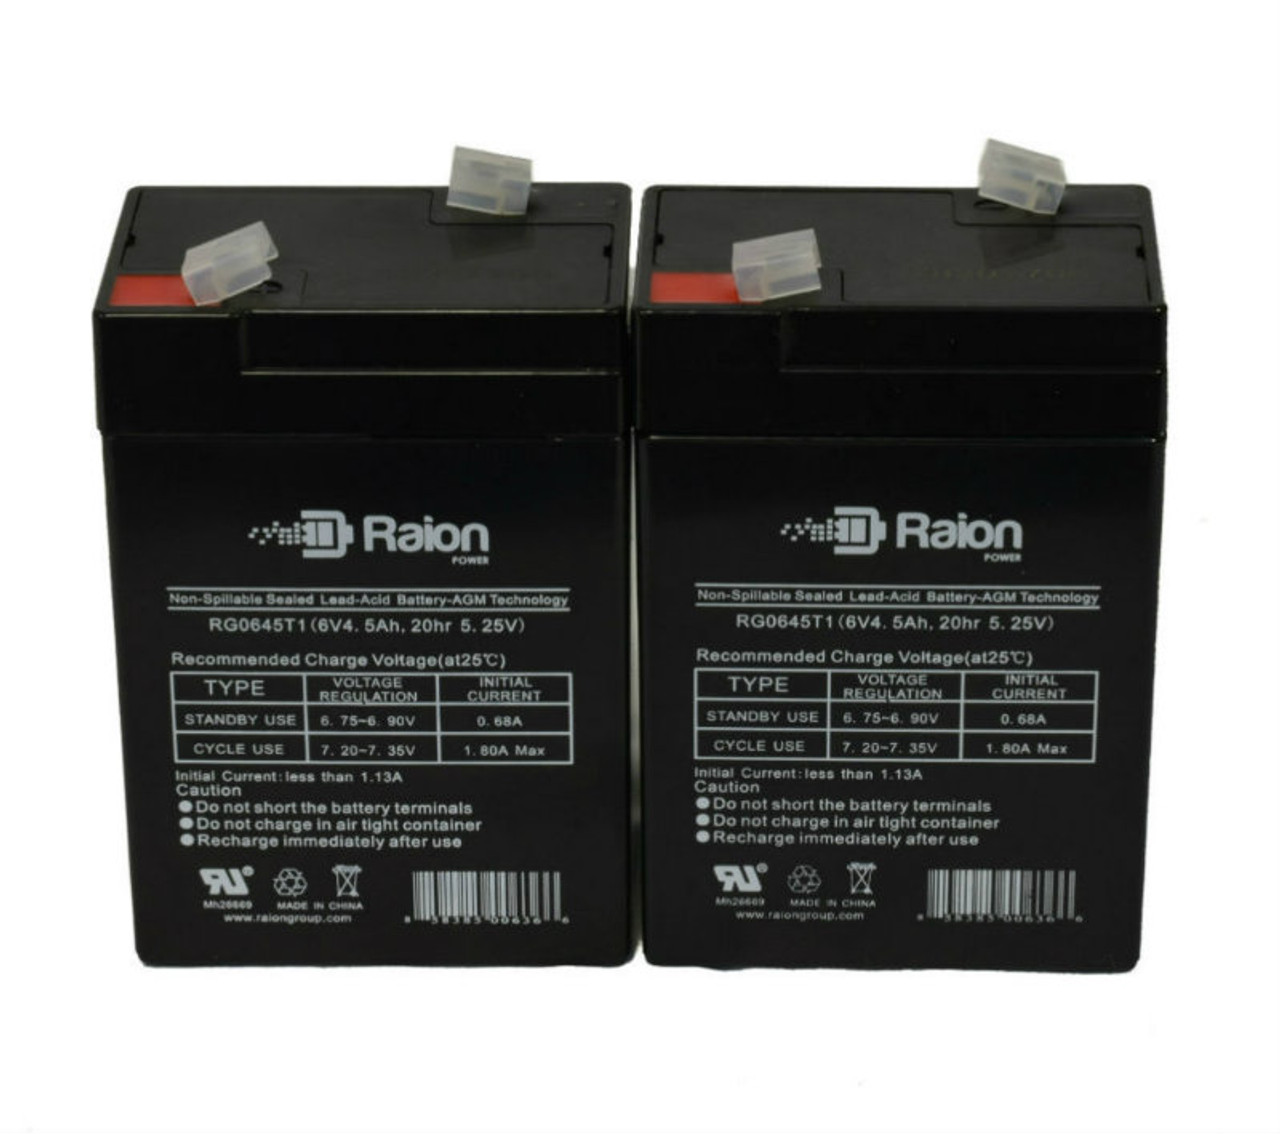 Raion Power RG0645T1 6V 4.5Ah Replacement Medical Equipment Battery for Alaris Medical 4510 Vital Check Monitor - 2 Pack